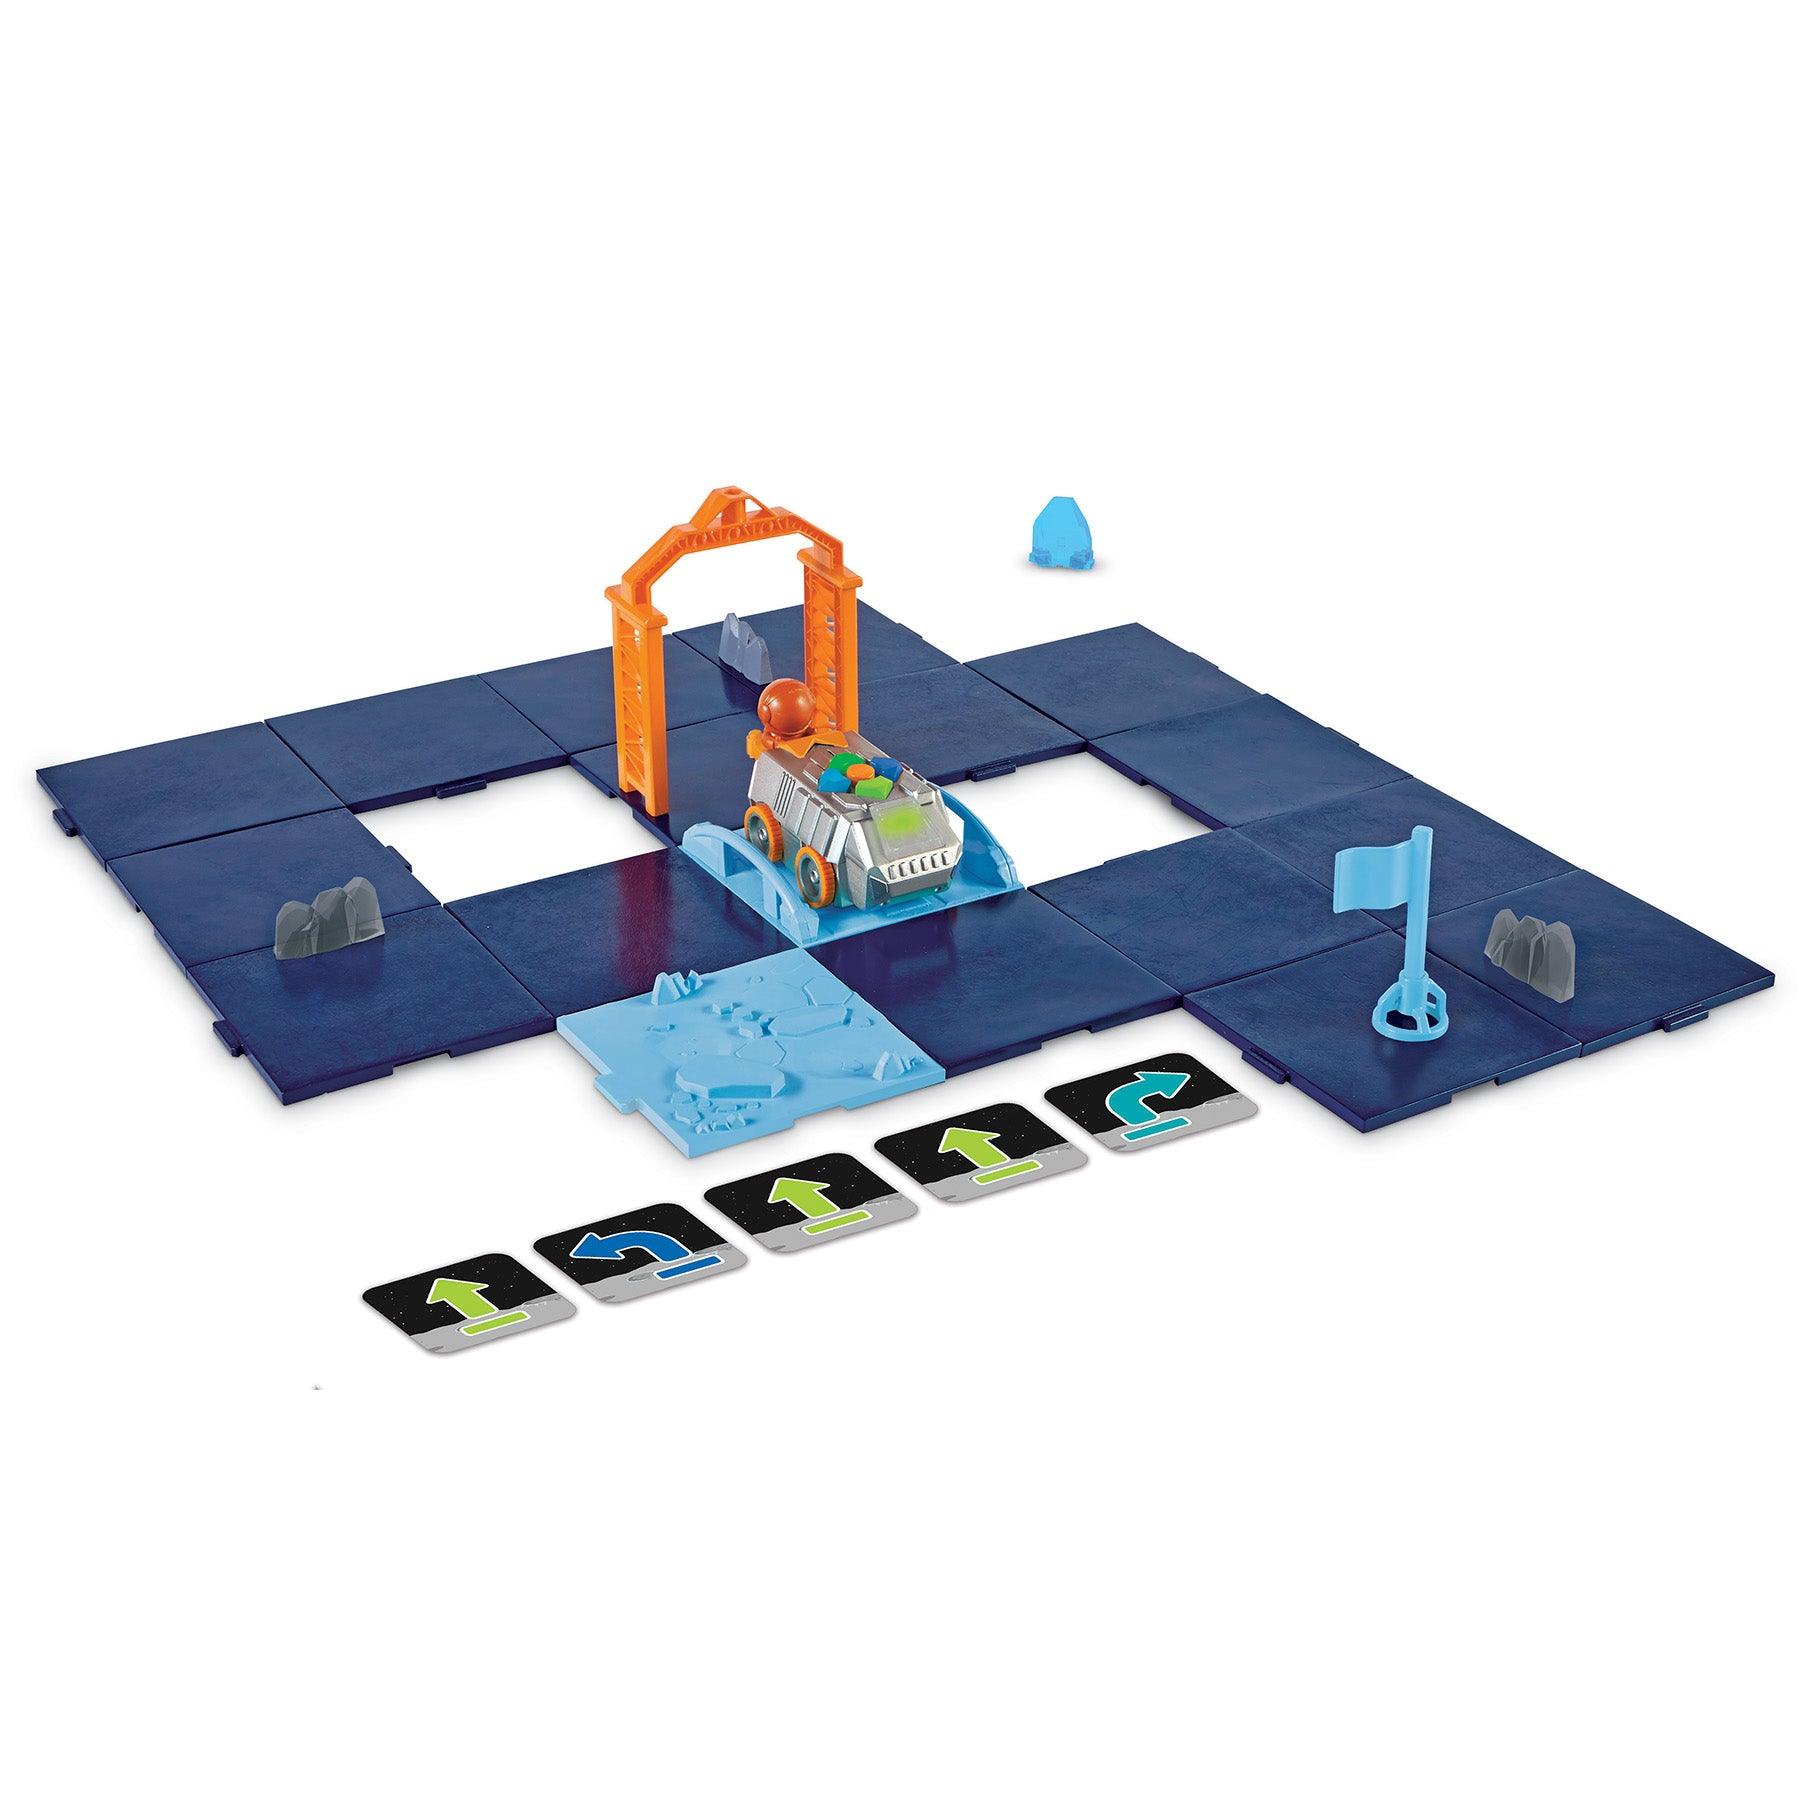 Space Rover Deluxe Coding Set - Loomini